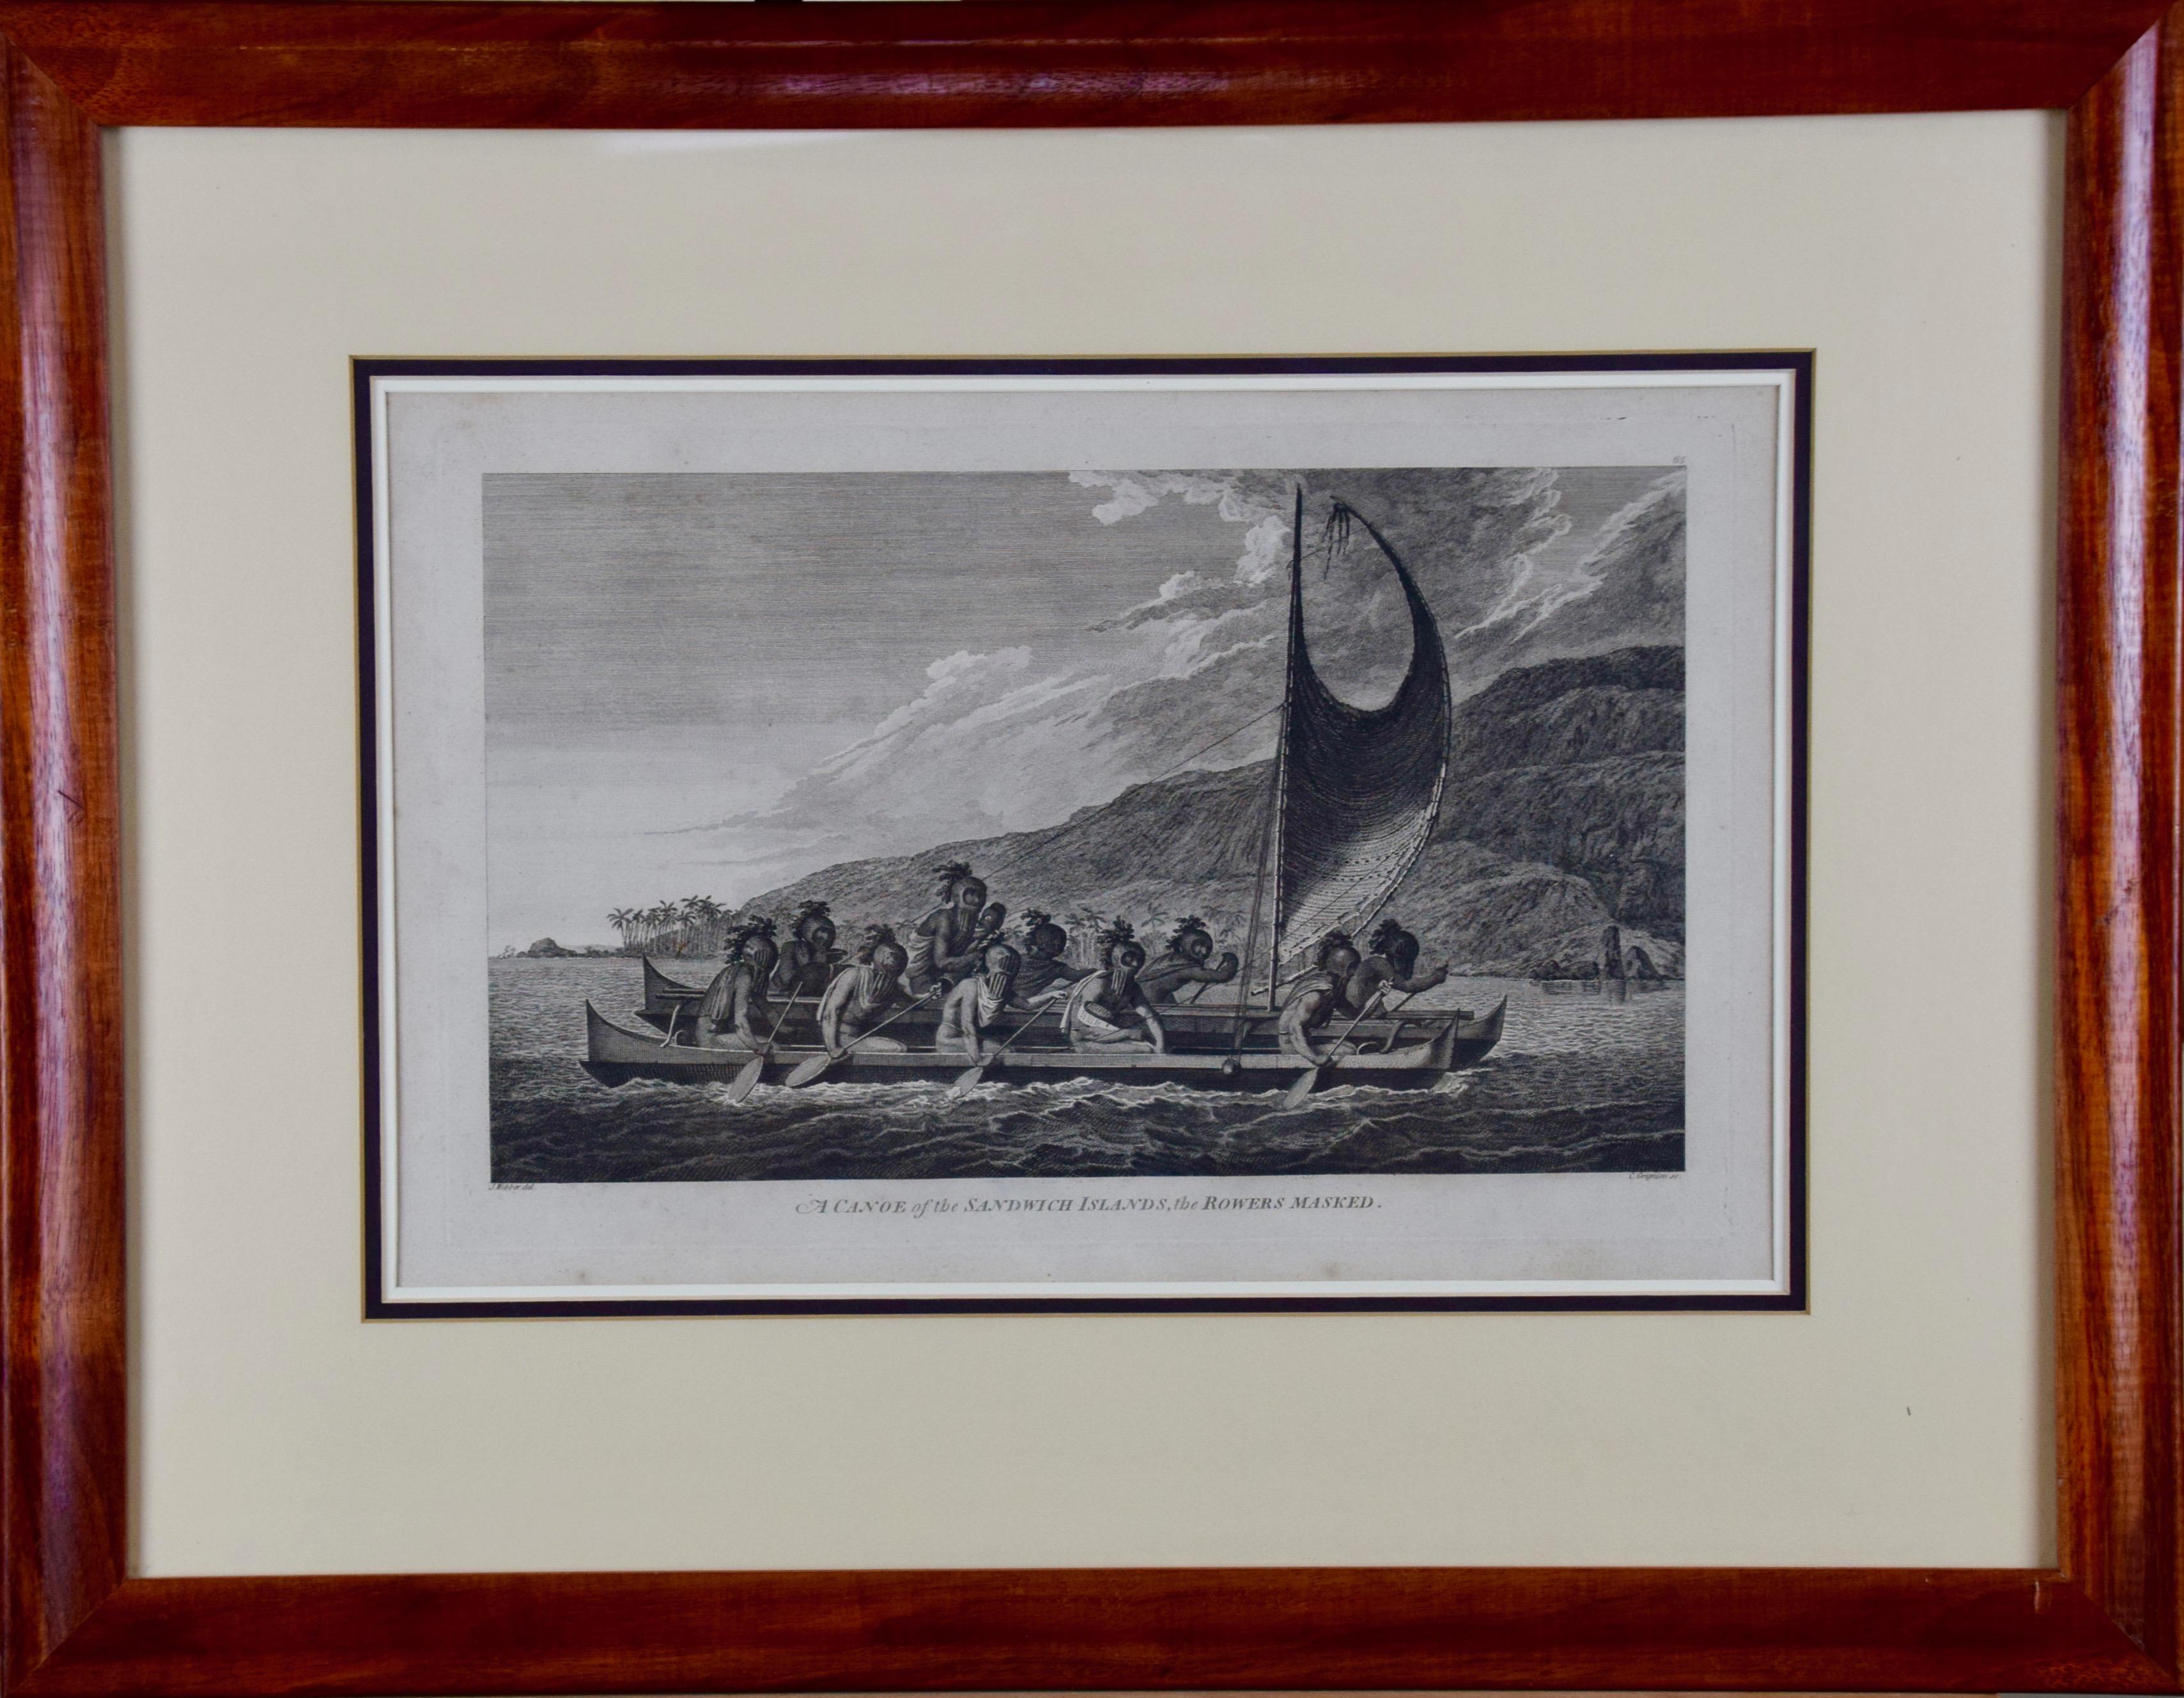 "Canoe of the Sandwich Islands" (Hawaii), Engraving of Captain Cook's 3rd Voyage